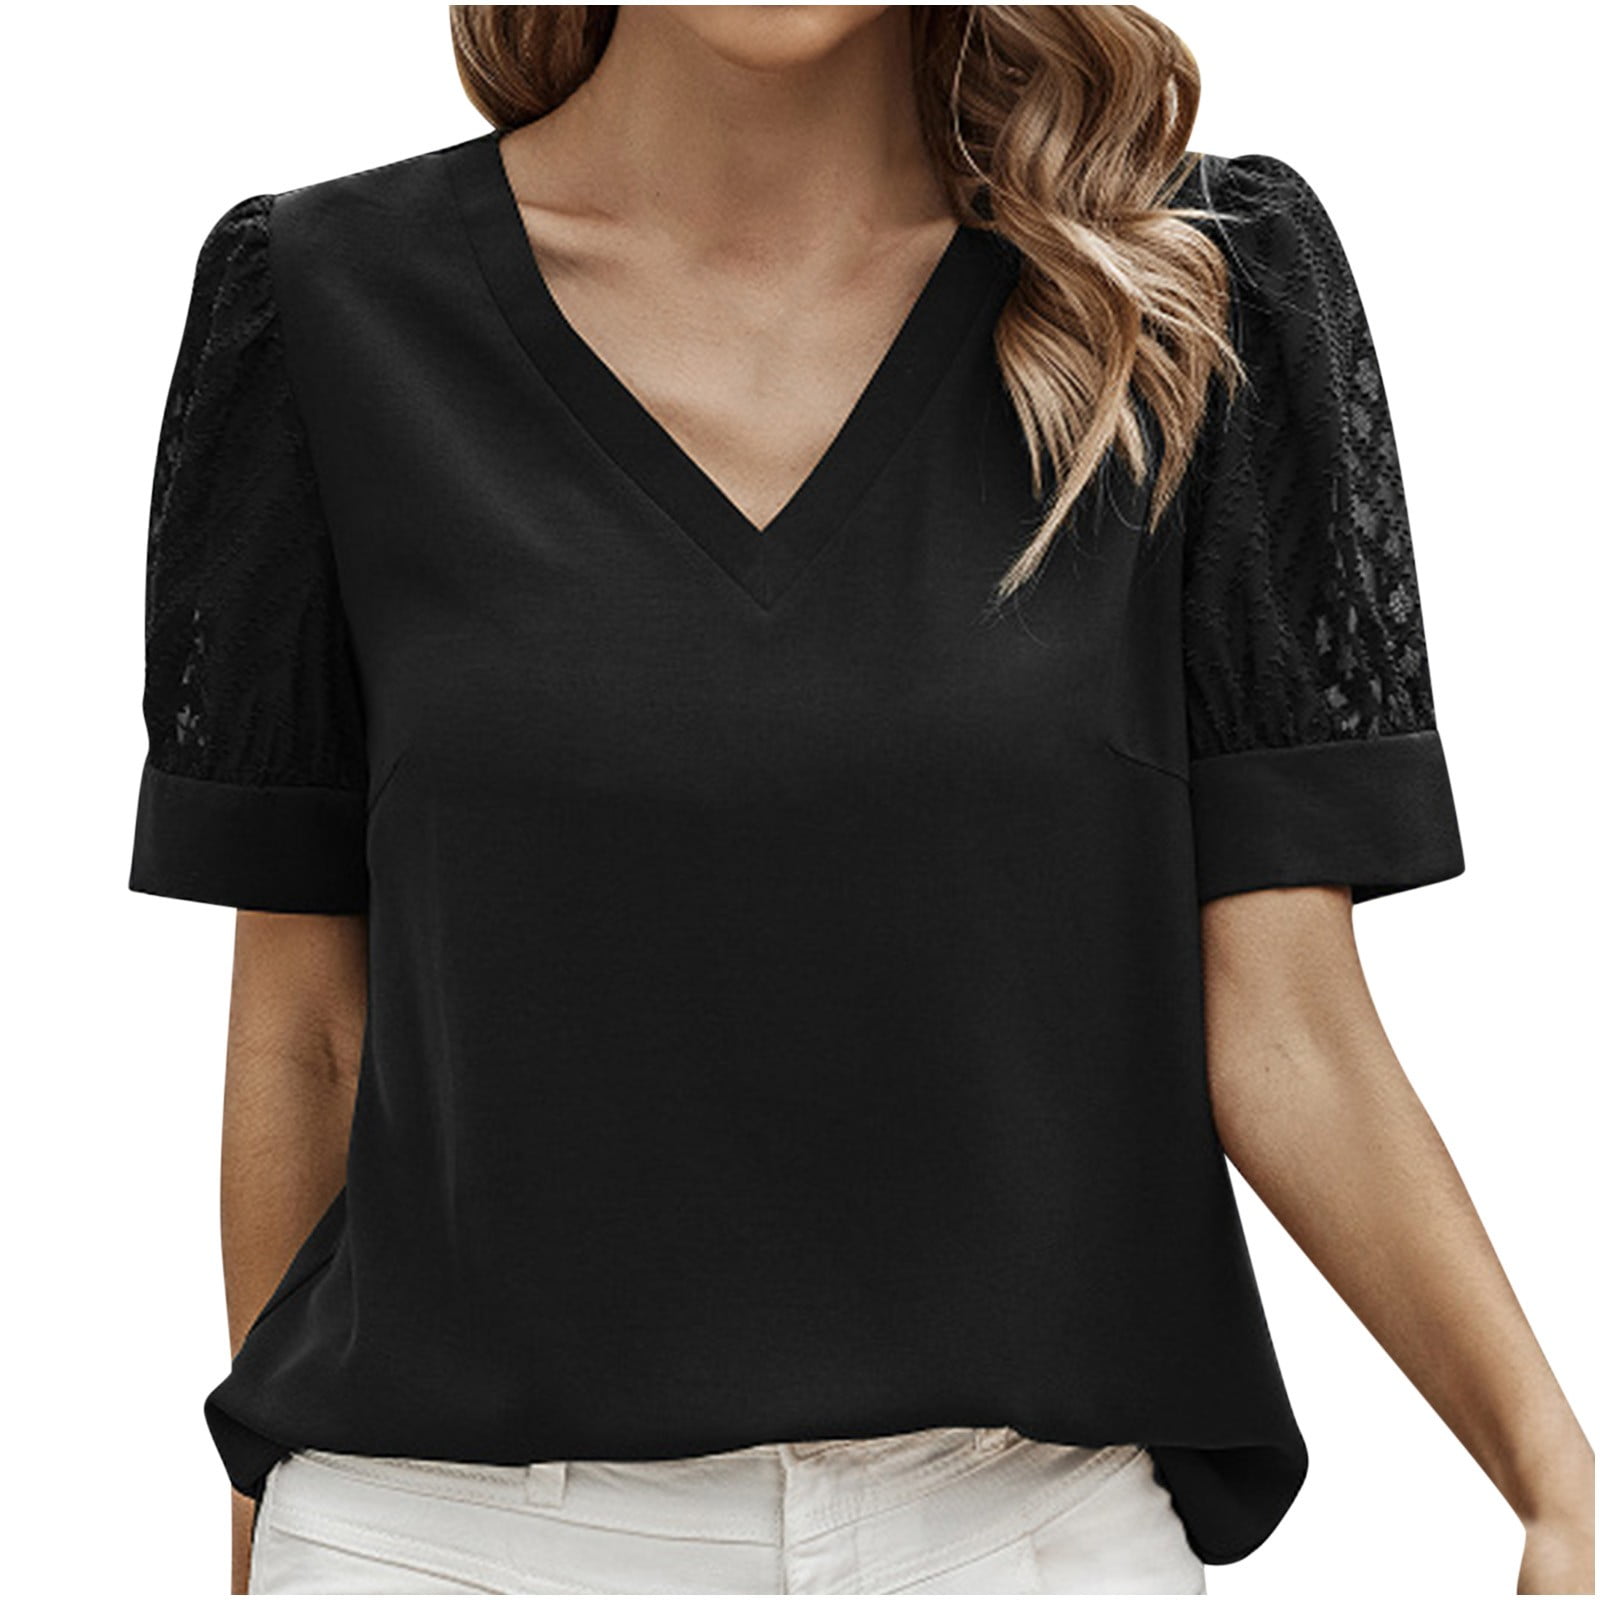 RQYYD Womens Business Casual Tops Mesh Puff Sleeve Work Shirts Solid Color  Dressy Tops Cute Summer Blouses V Neck T Shirts(Black,S) 